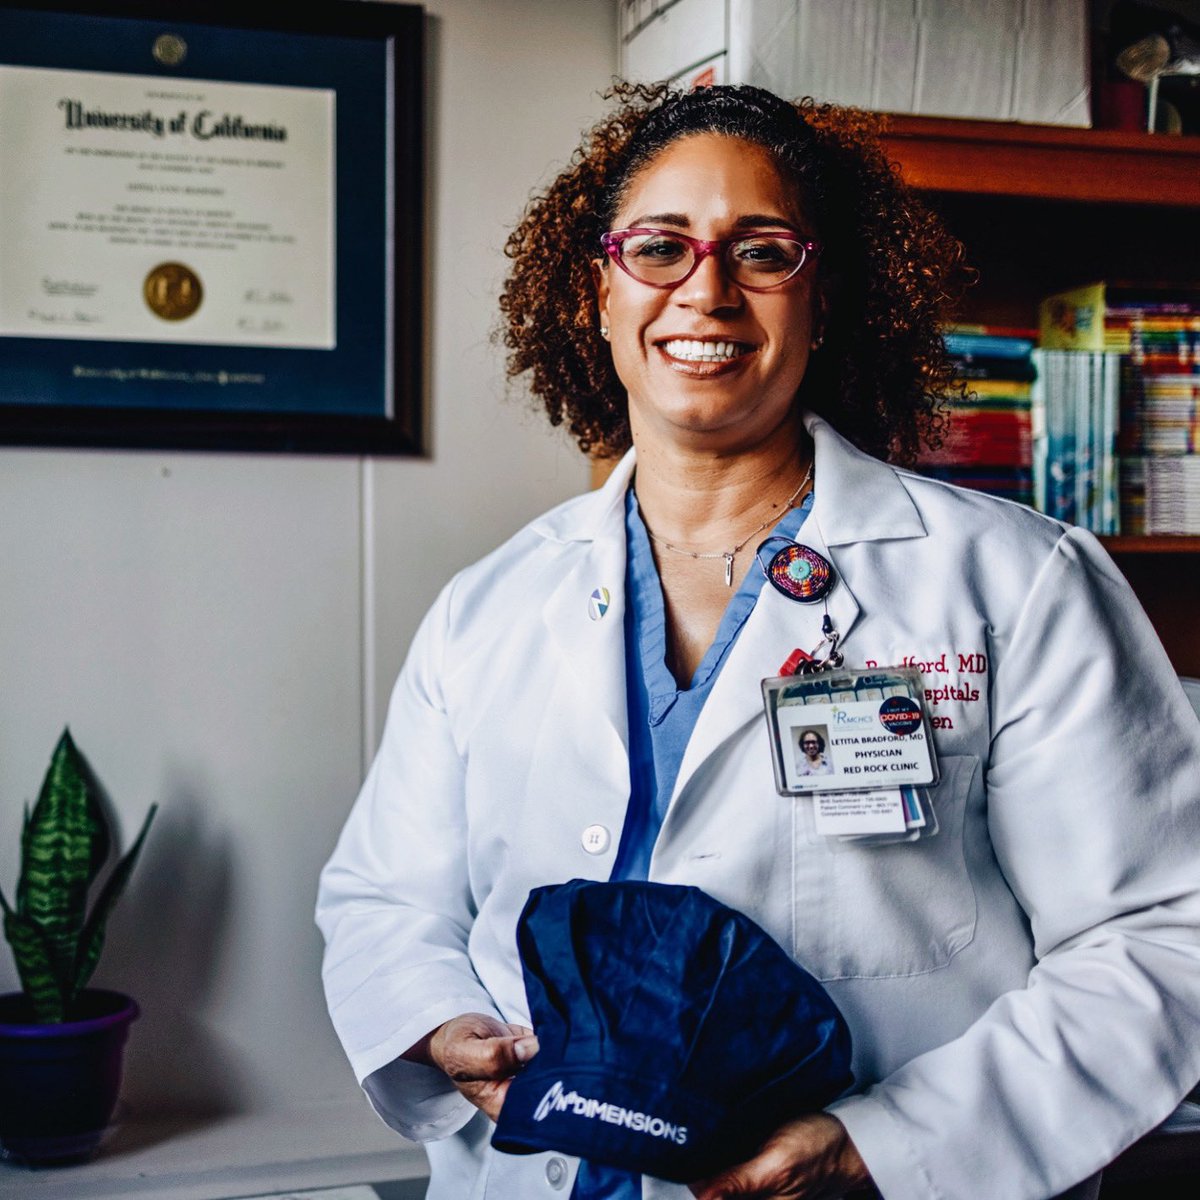 “Although Black History Month is coming to an end, diversity issues continue to exist within the field of medicine. Never stop listening and learning to gain understanding on how to serve our patient population better,” says Dr. Bradford. @OrthochickMD 

#diverstiy #medicine